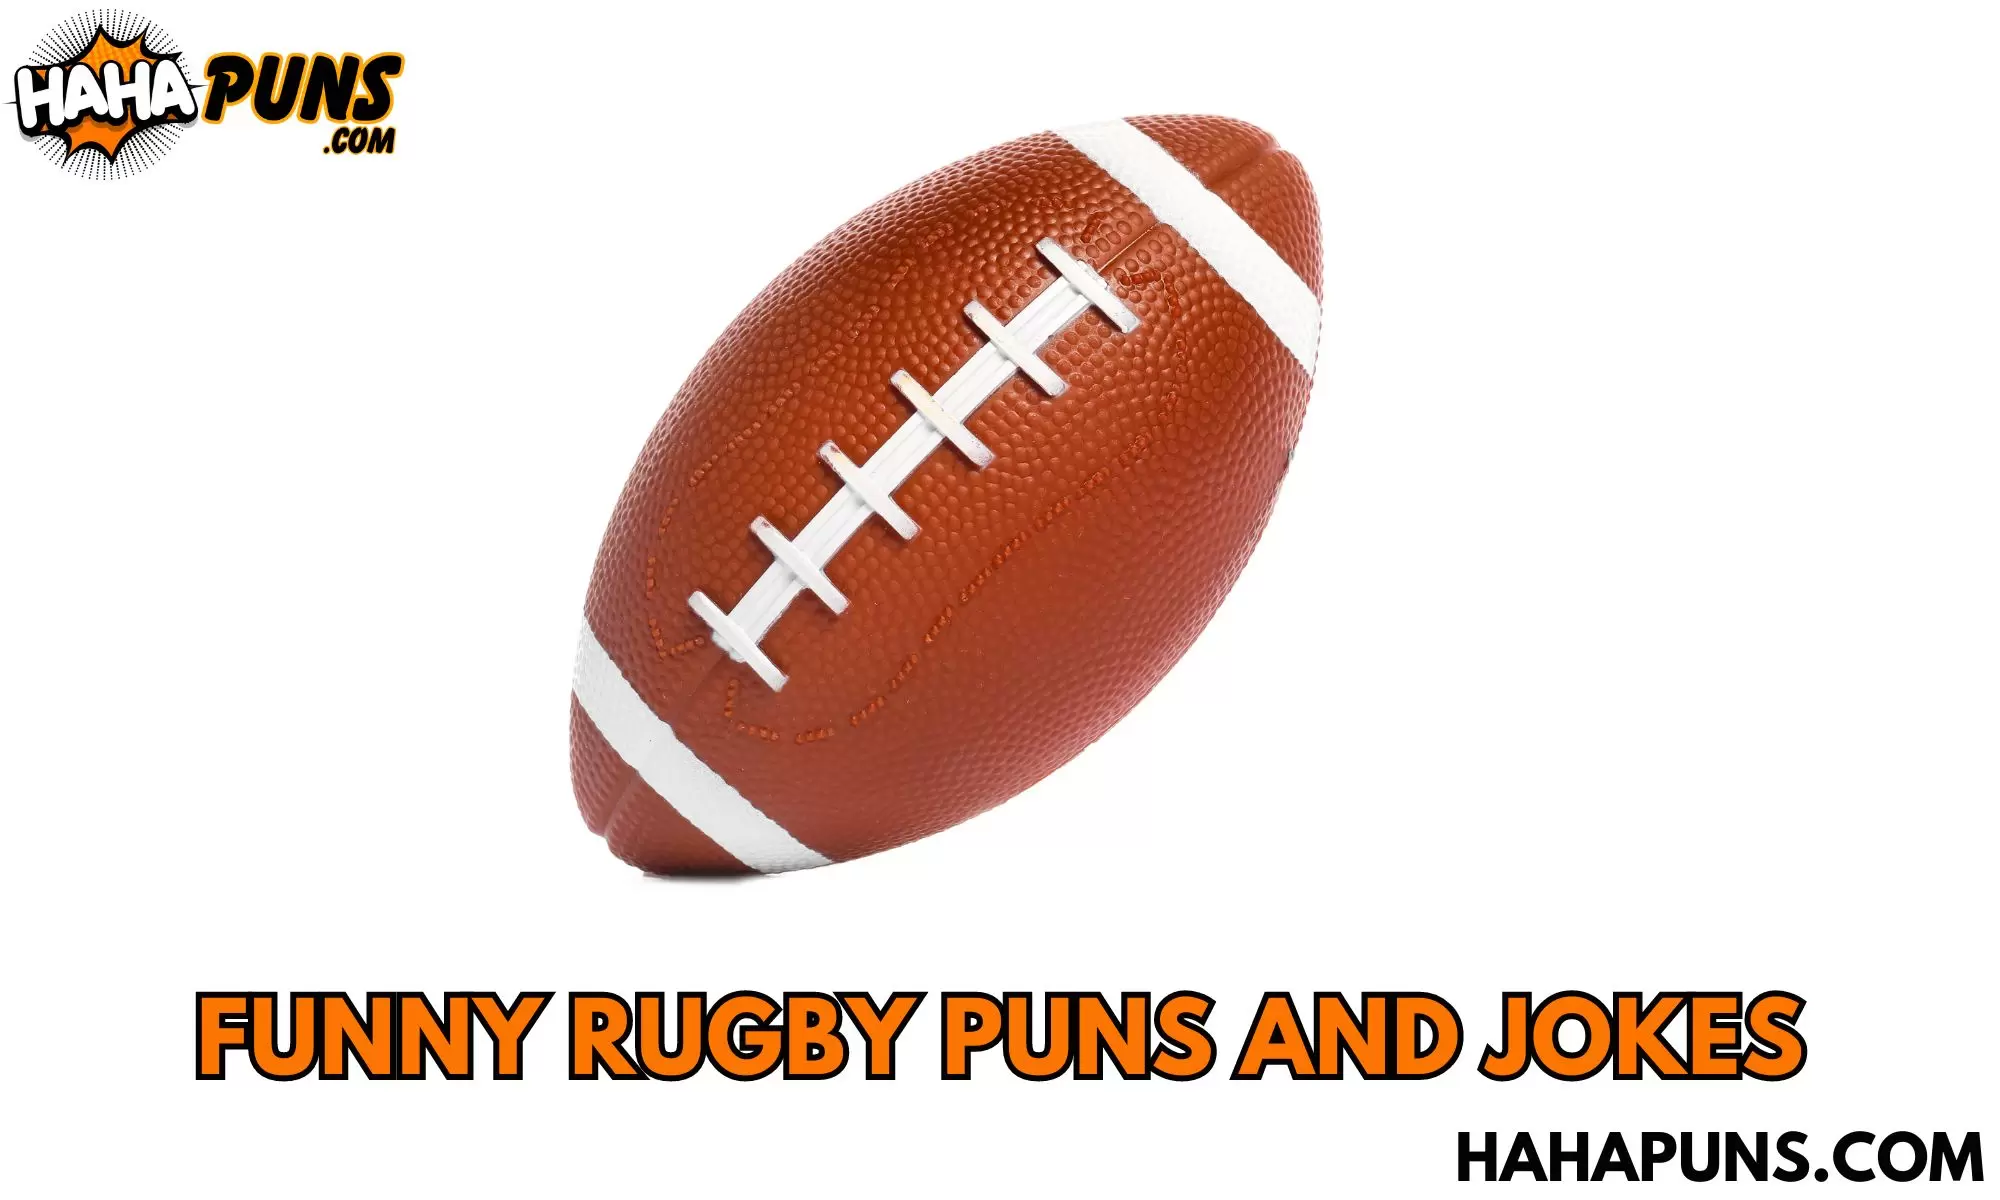 Funny Rugby Puns and Jokes